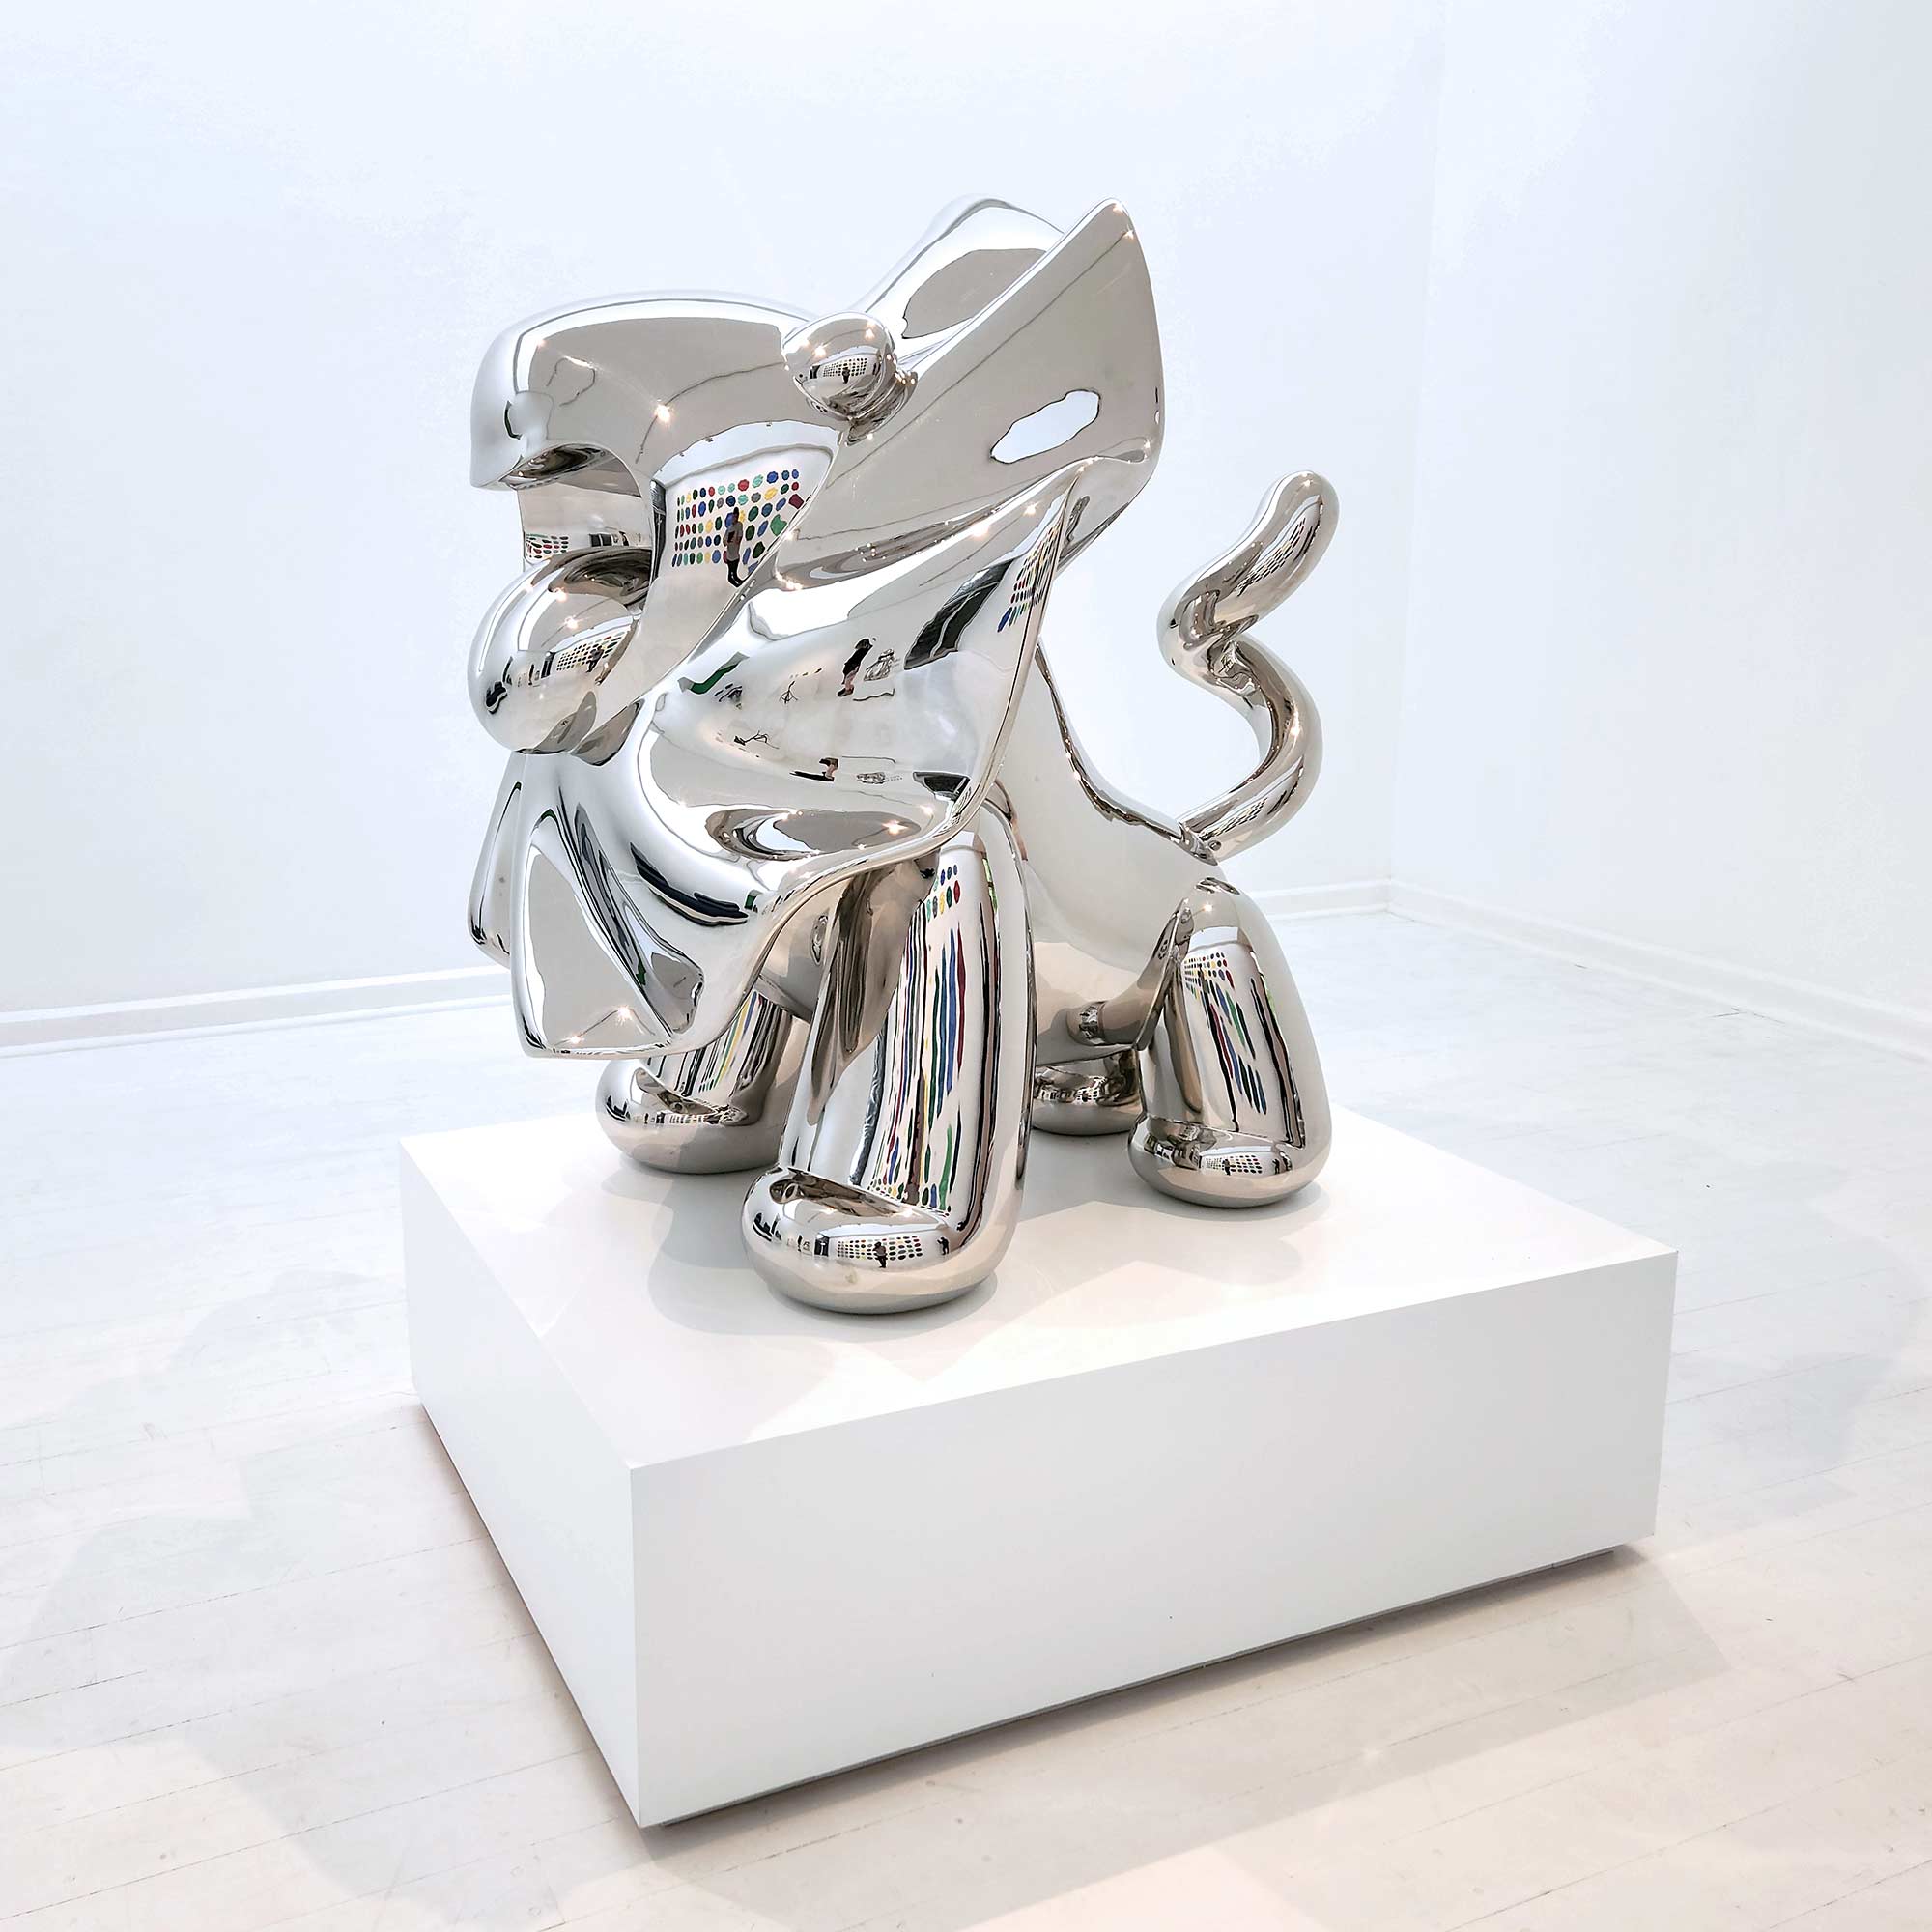 Lions breath polished stainless steel sculpture large size by artist Ferdi B Dick , side view